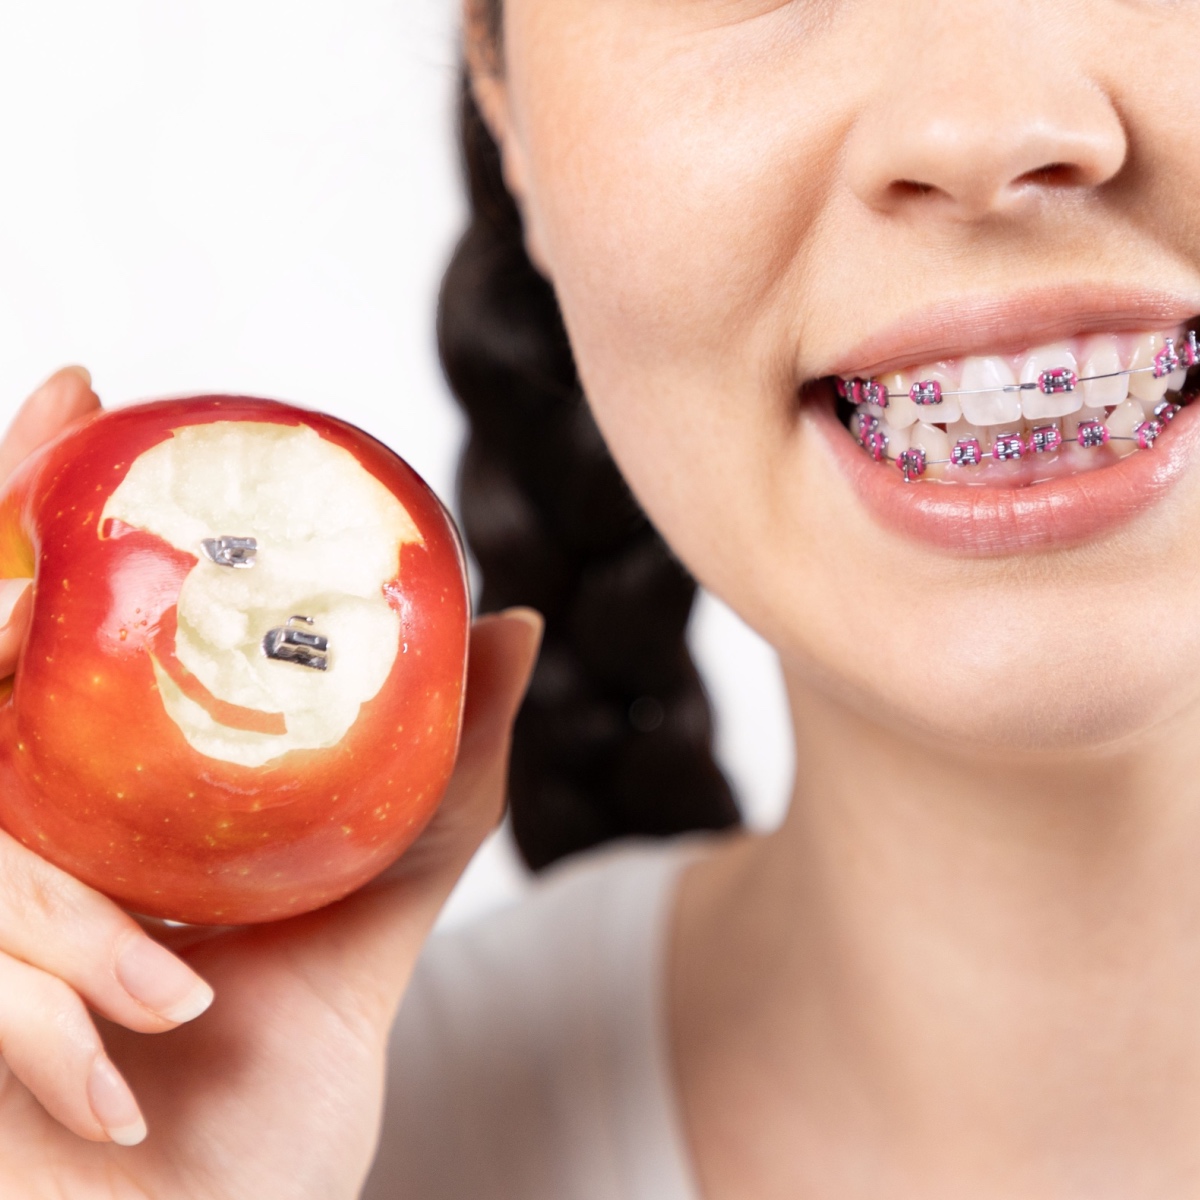 Top 5 Foods to Avoid When You Have Houston Braces